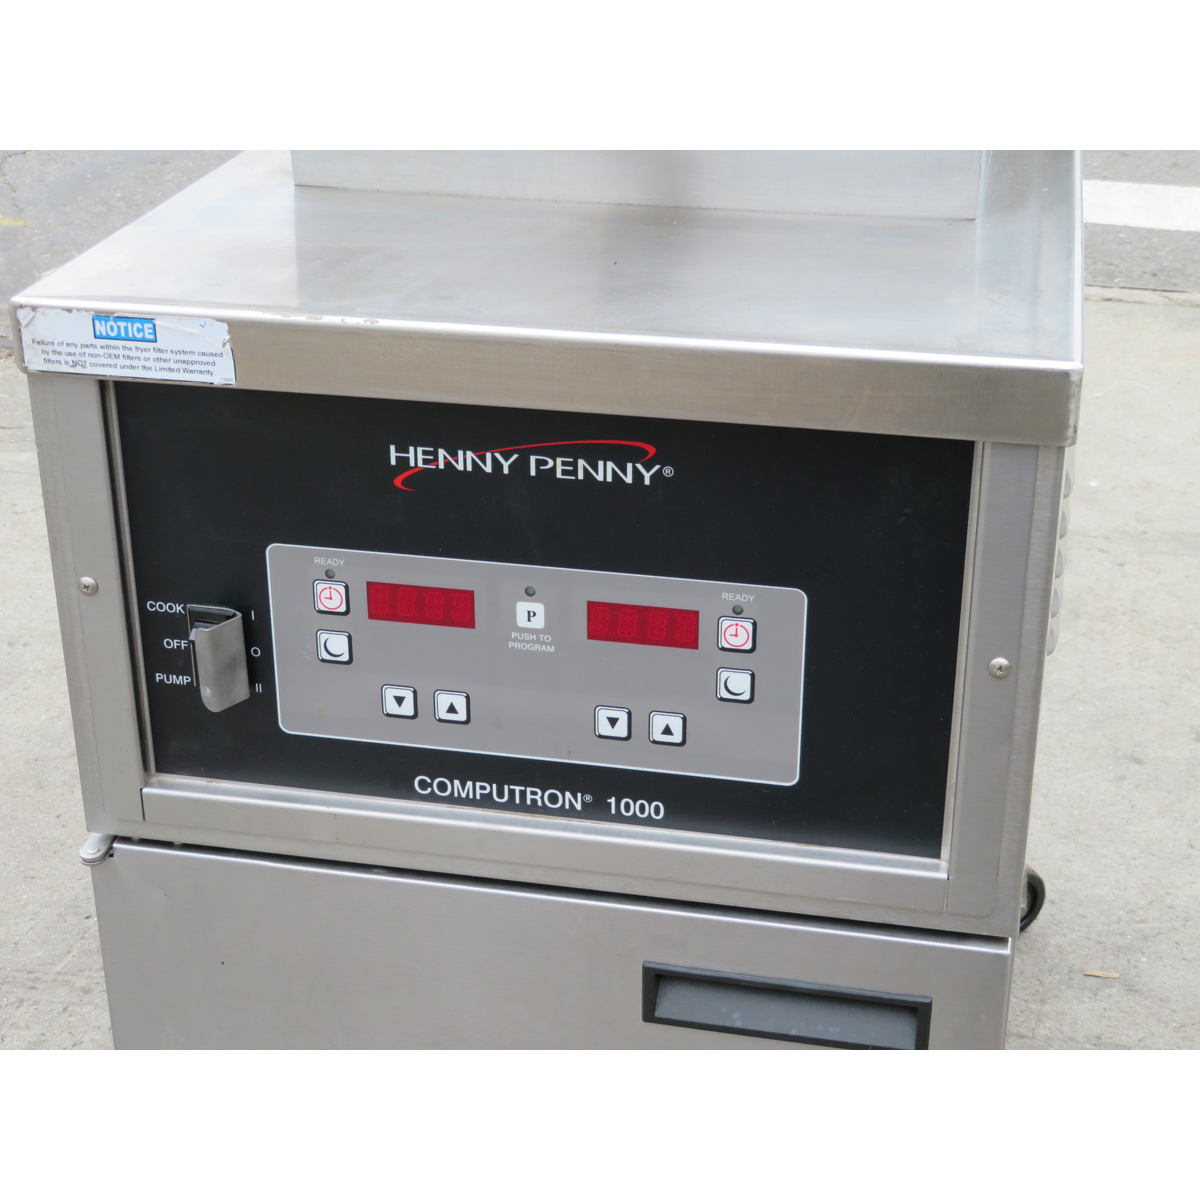 Henny Penny 600 Computron 1000 Natural Gas Pressure Fryer 120V Pressure Fryer, Used Great Condition image 1